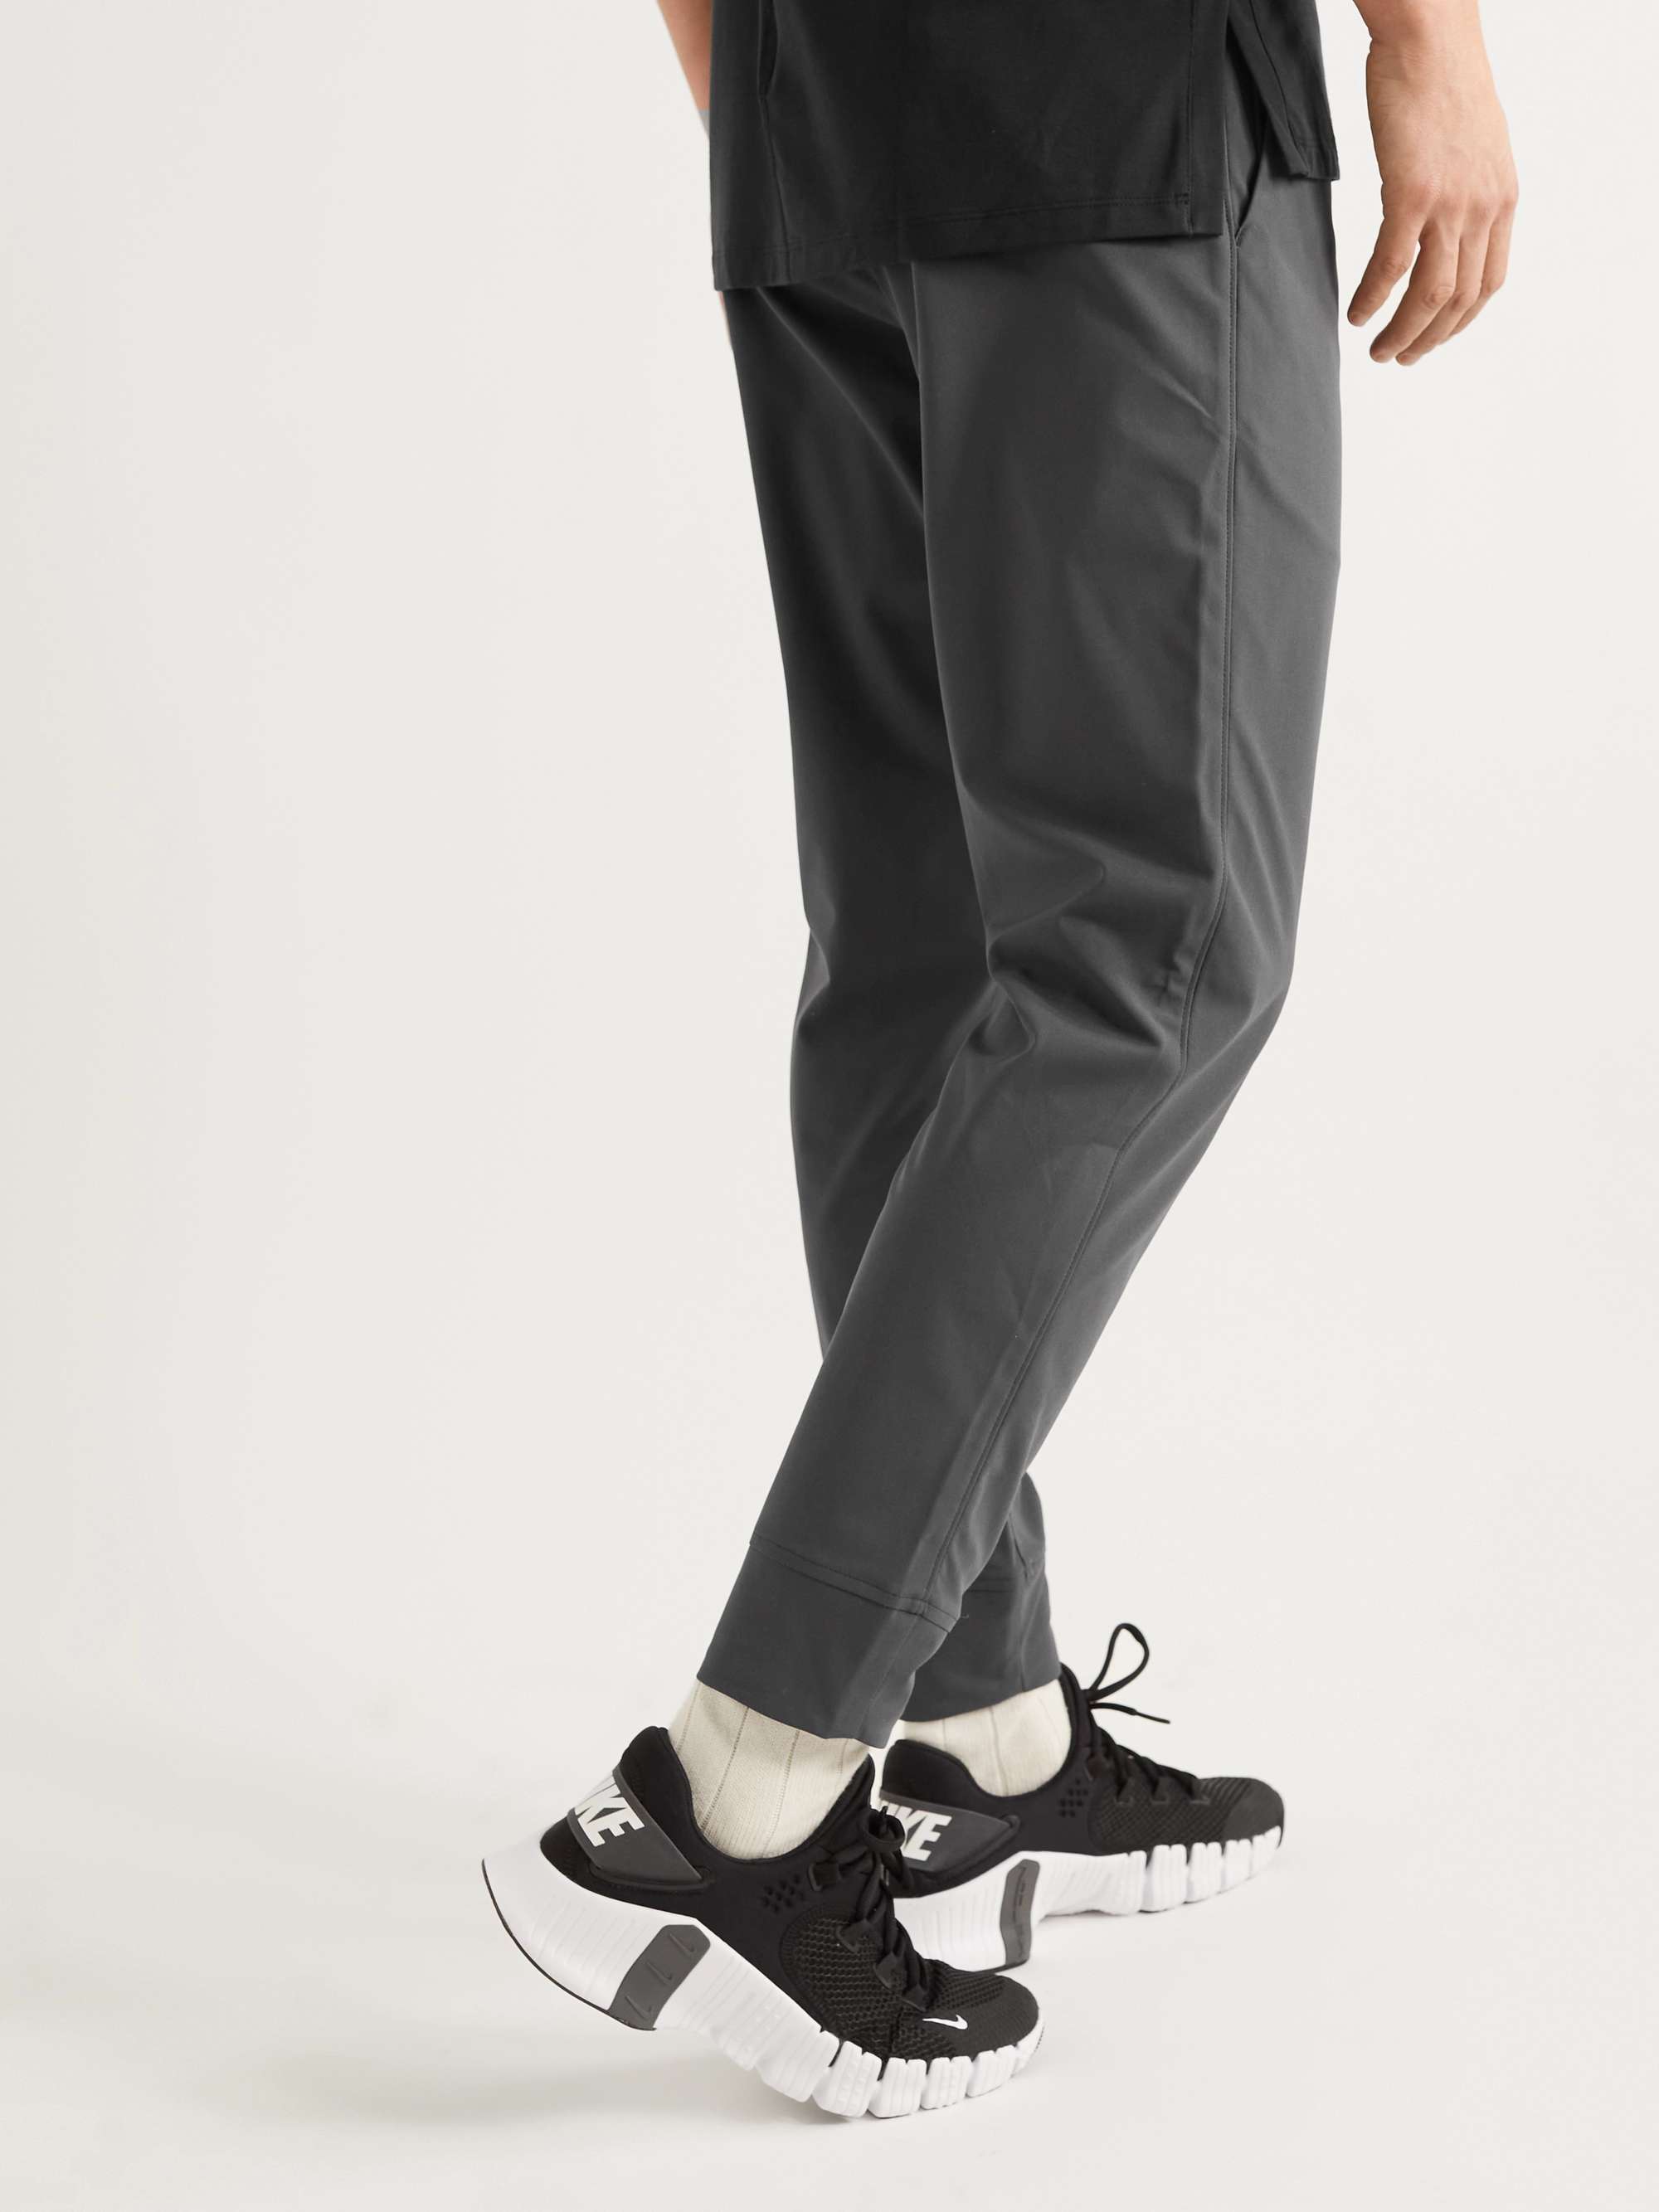 REIGNING CHAMP Coach's Slim-Fit Tapered Primeflex Drawstring Trousers